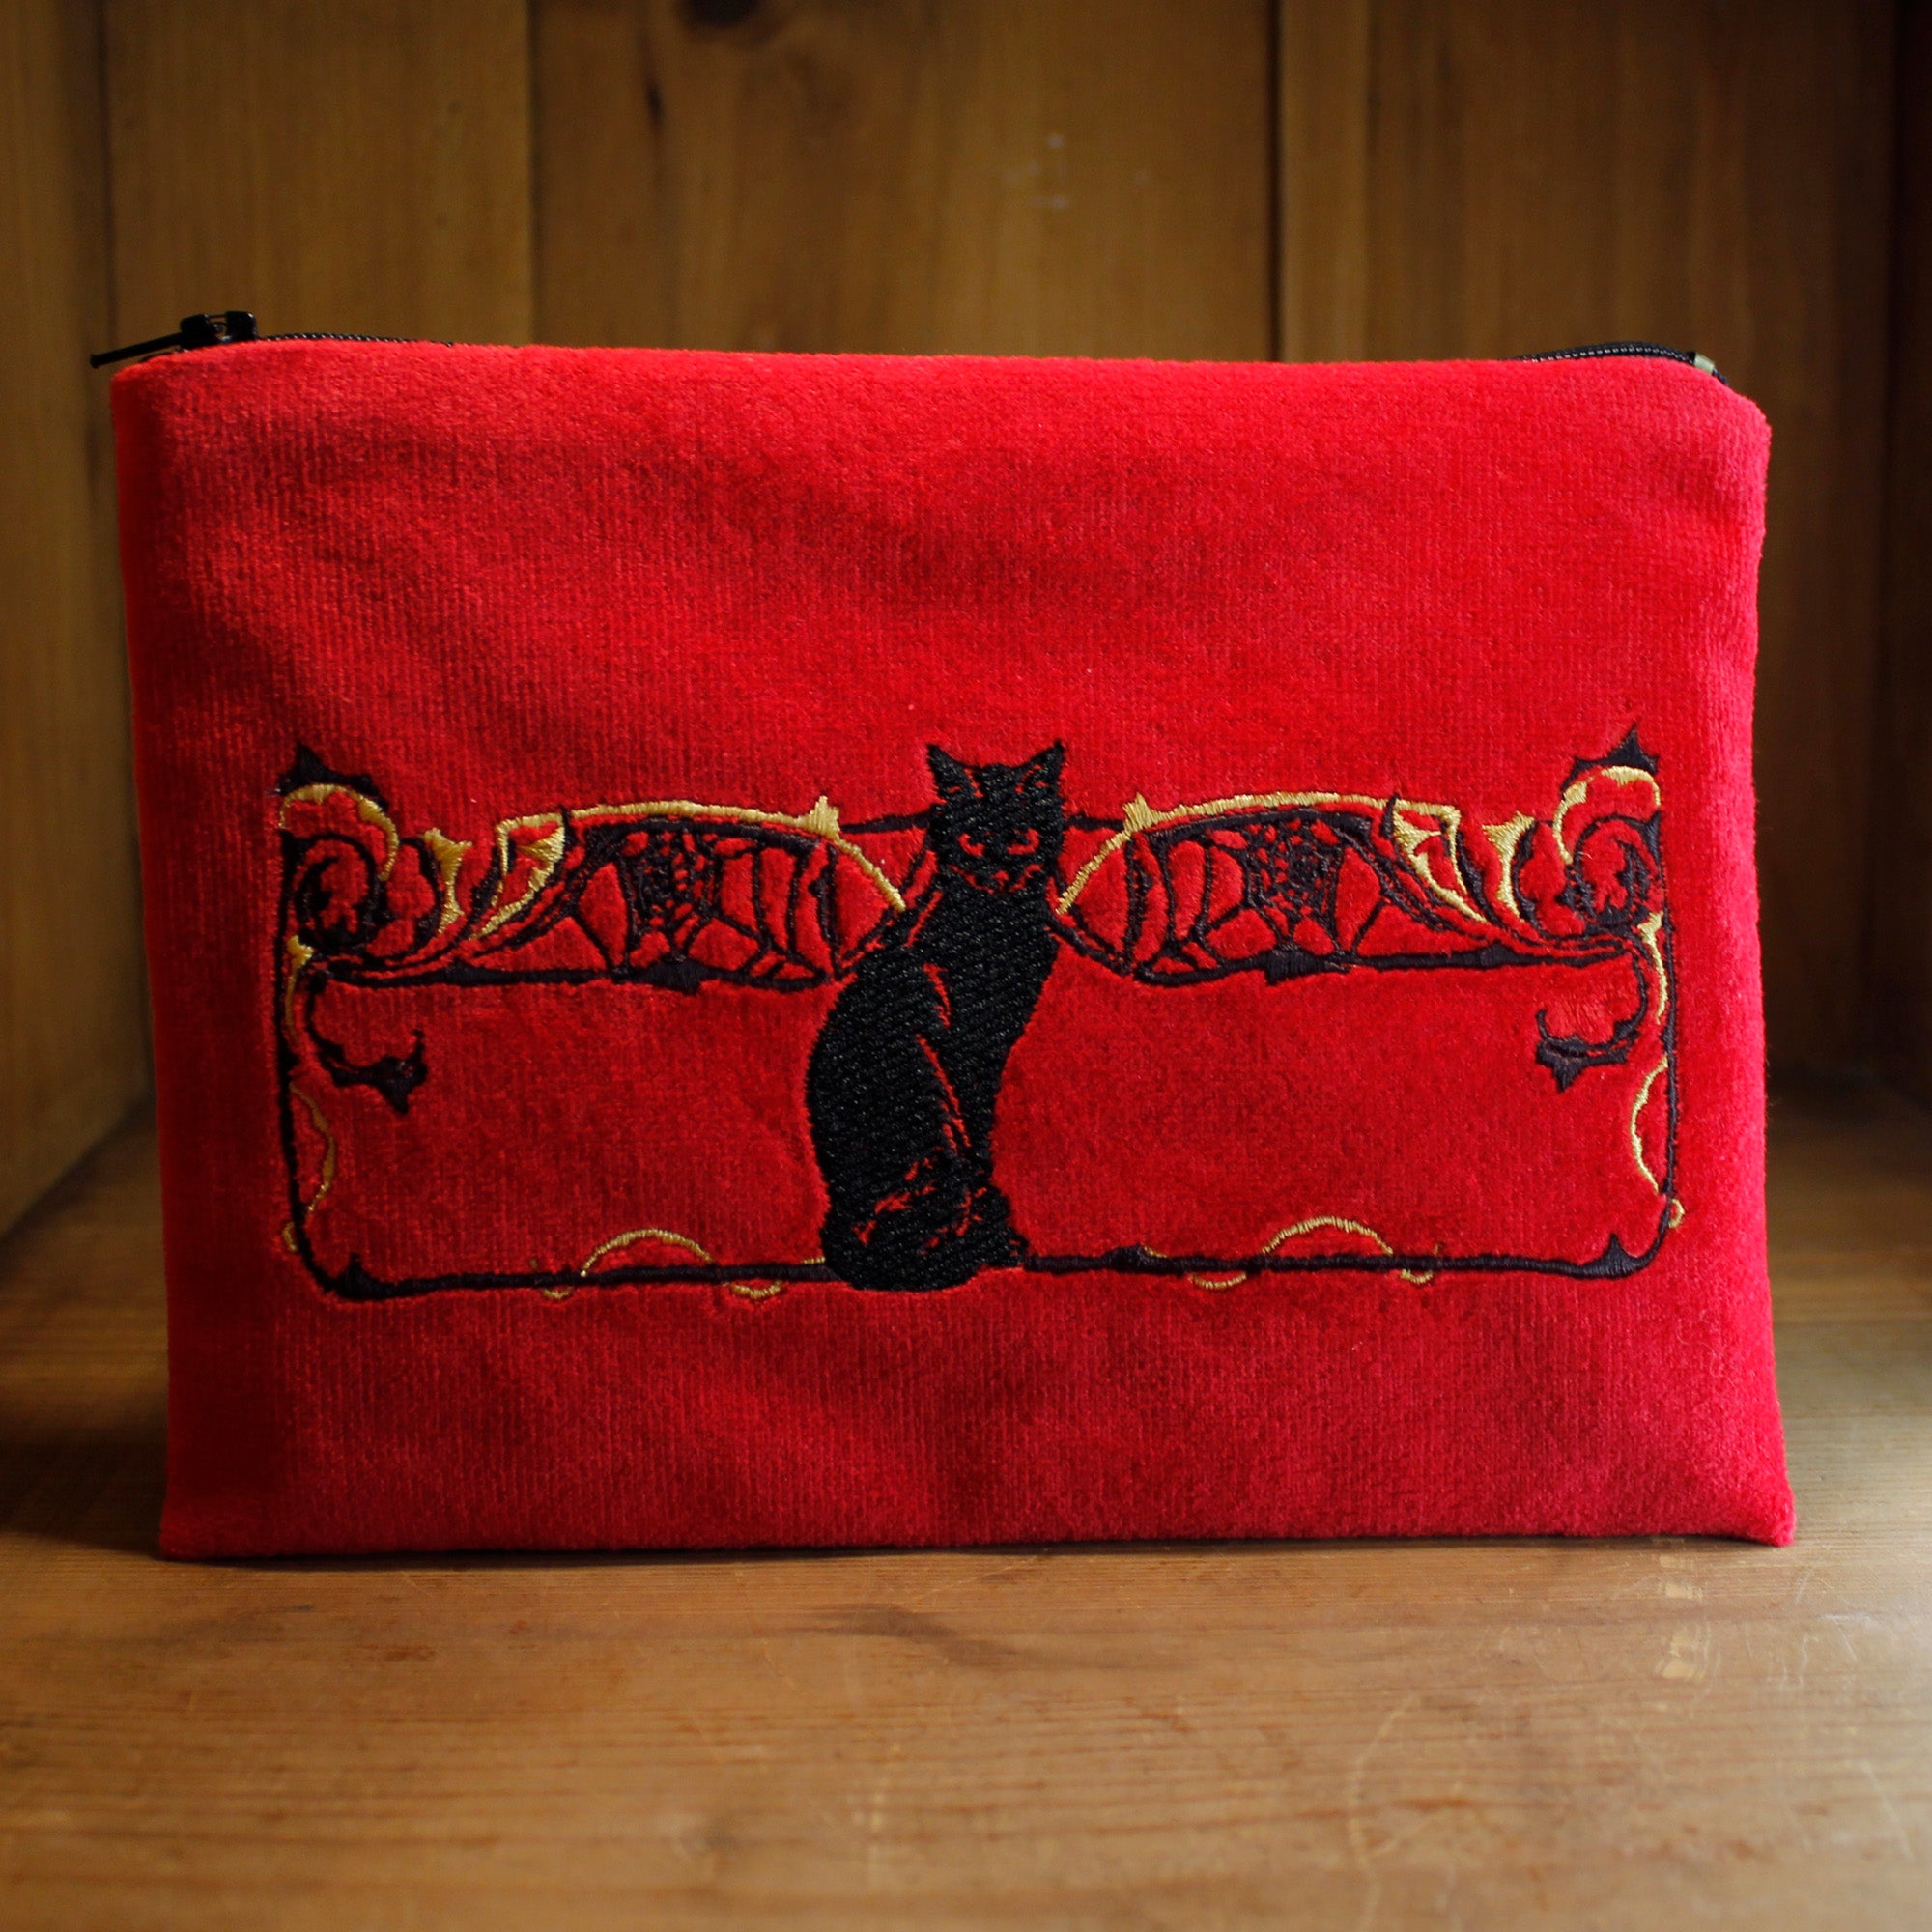 EMBROIDERED COSMETIC BAG "CAT NOIR"